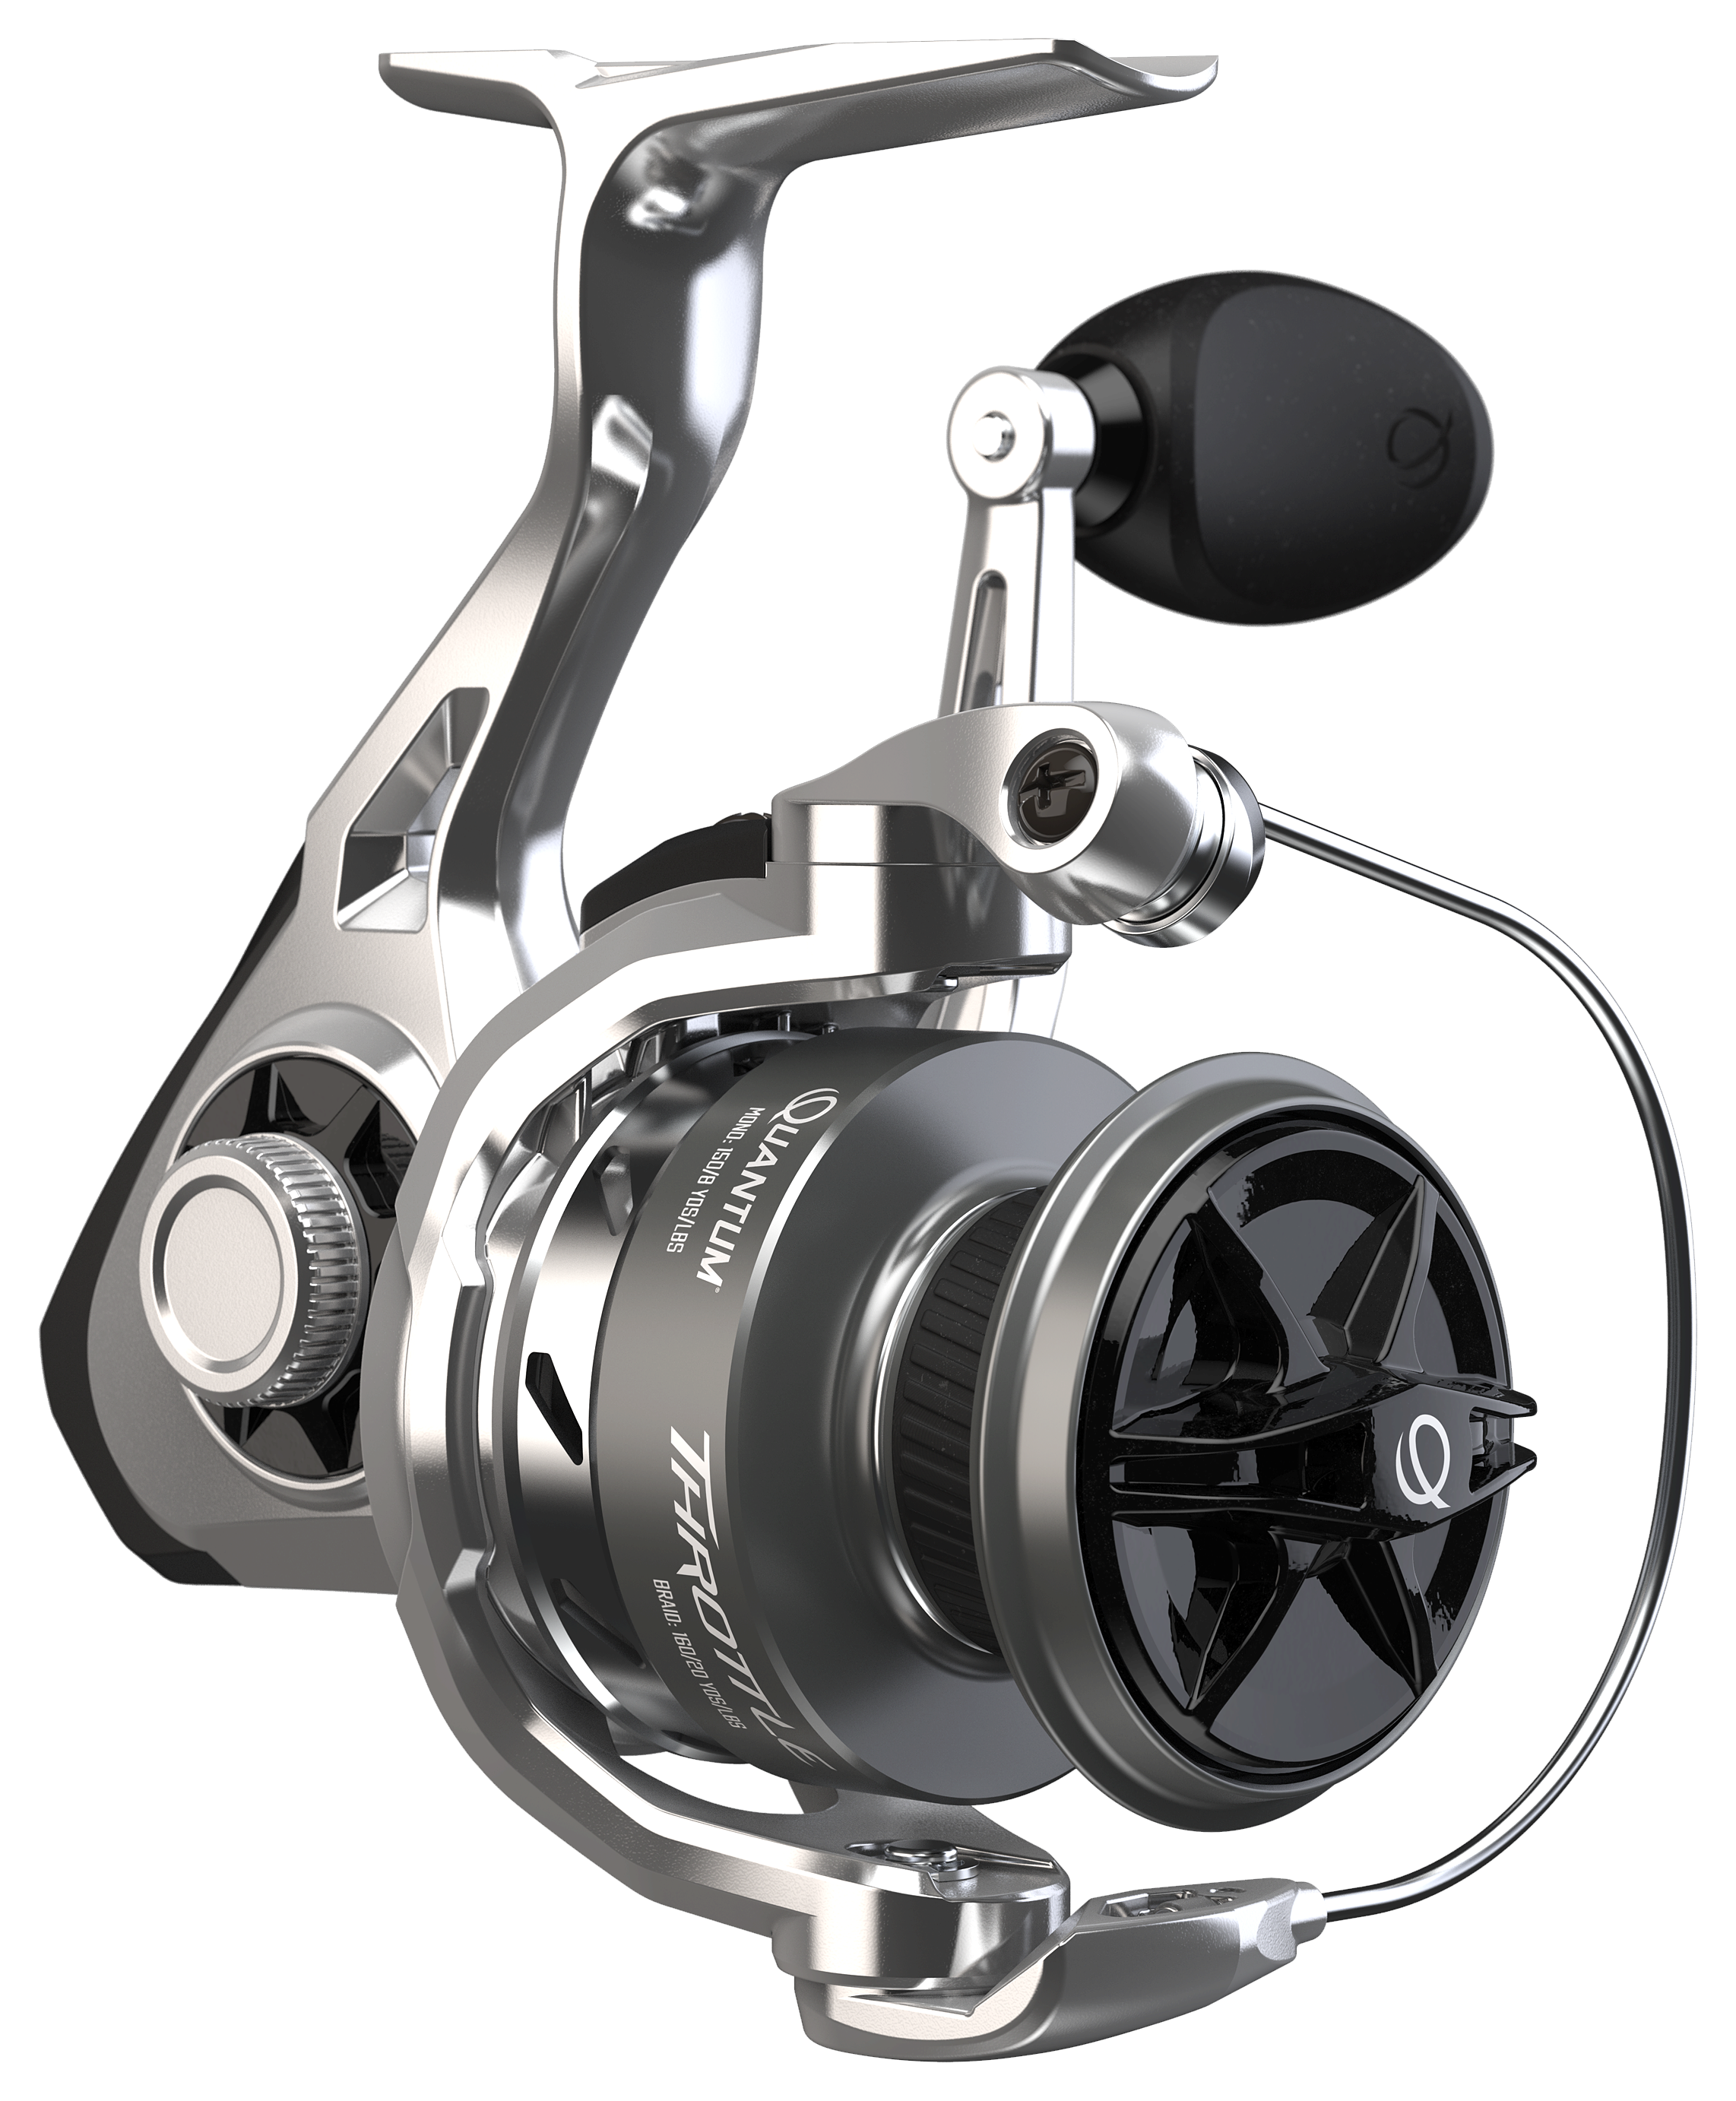 Quantum Throttle Spinning Fishing Reel, 10 + 1 Ball Bearings with a Smooth  and Powerful 6.2:1 Gear Ratio, Ultra-Smooth Carbon Fiber Drag System,  Dura-Lok Anti-Reverse Clutch, and MaxCast II Spool : 